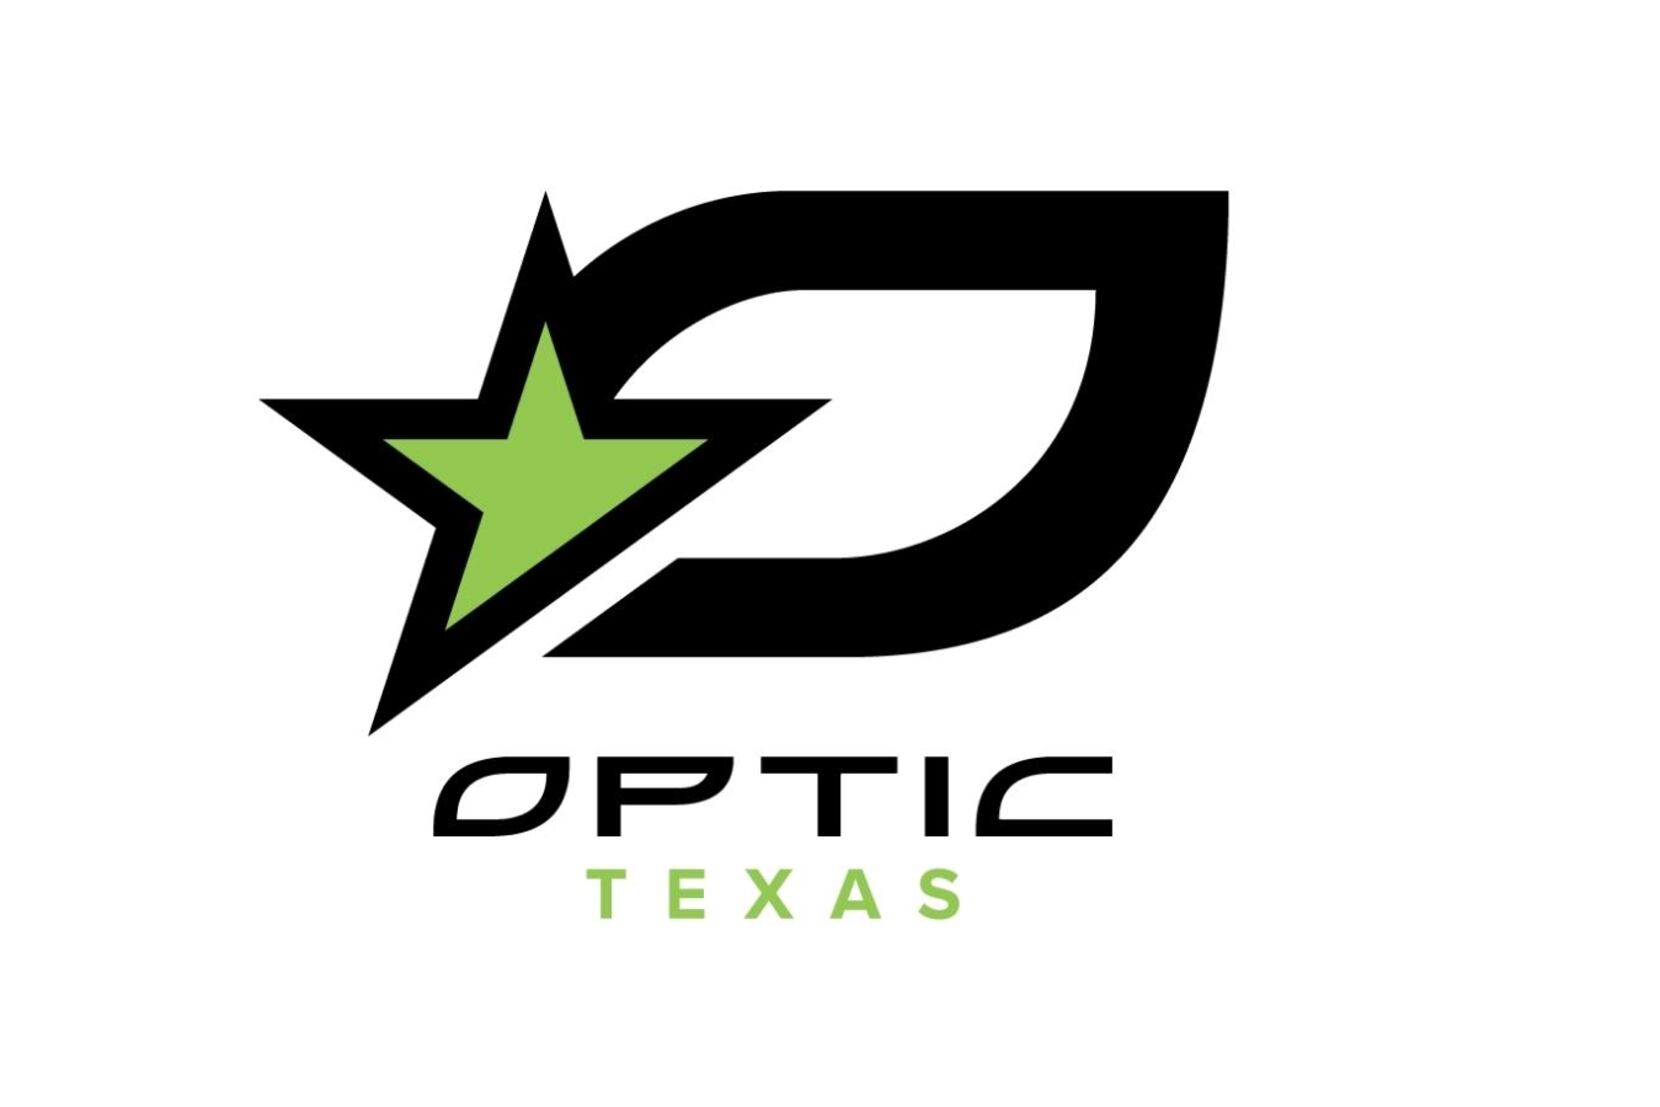 OpTic Texas makes another change just a month after Scump's